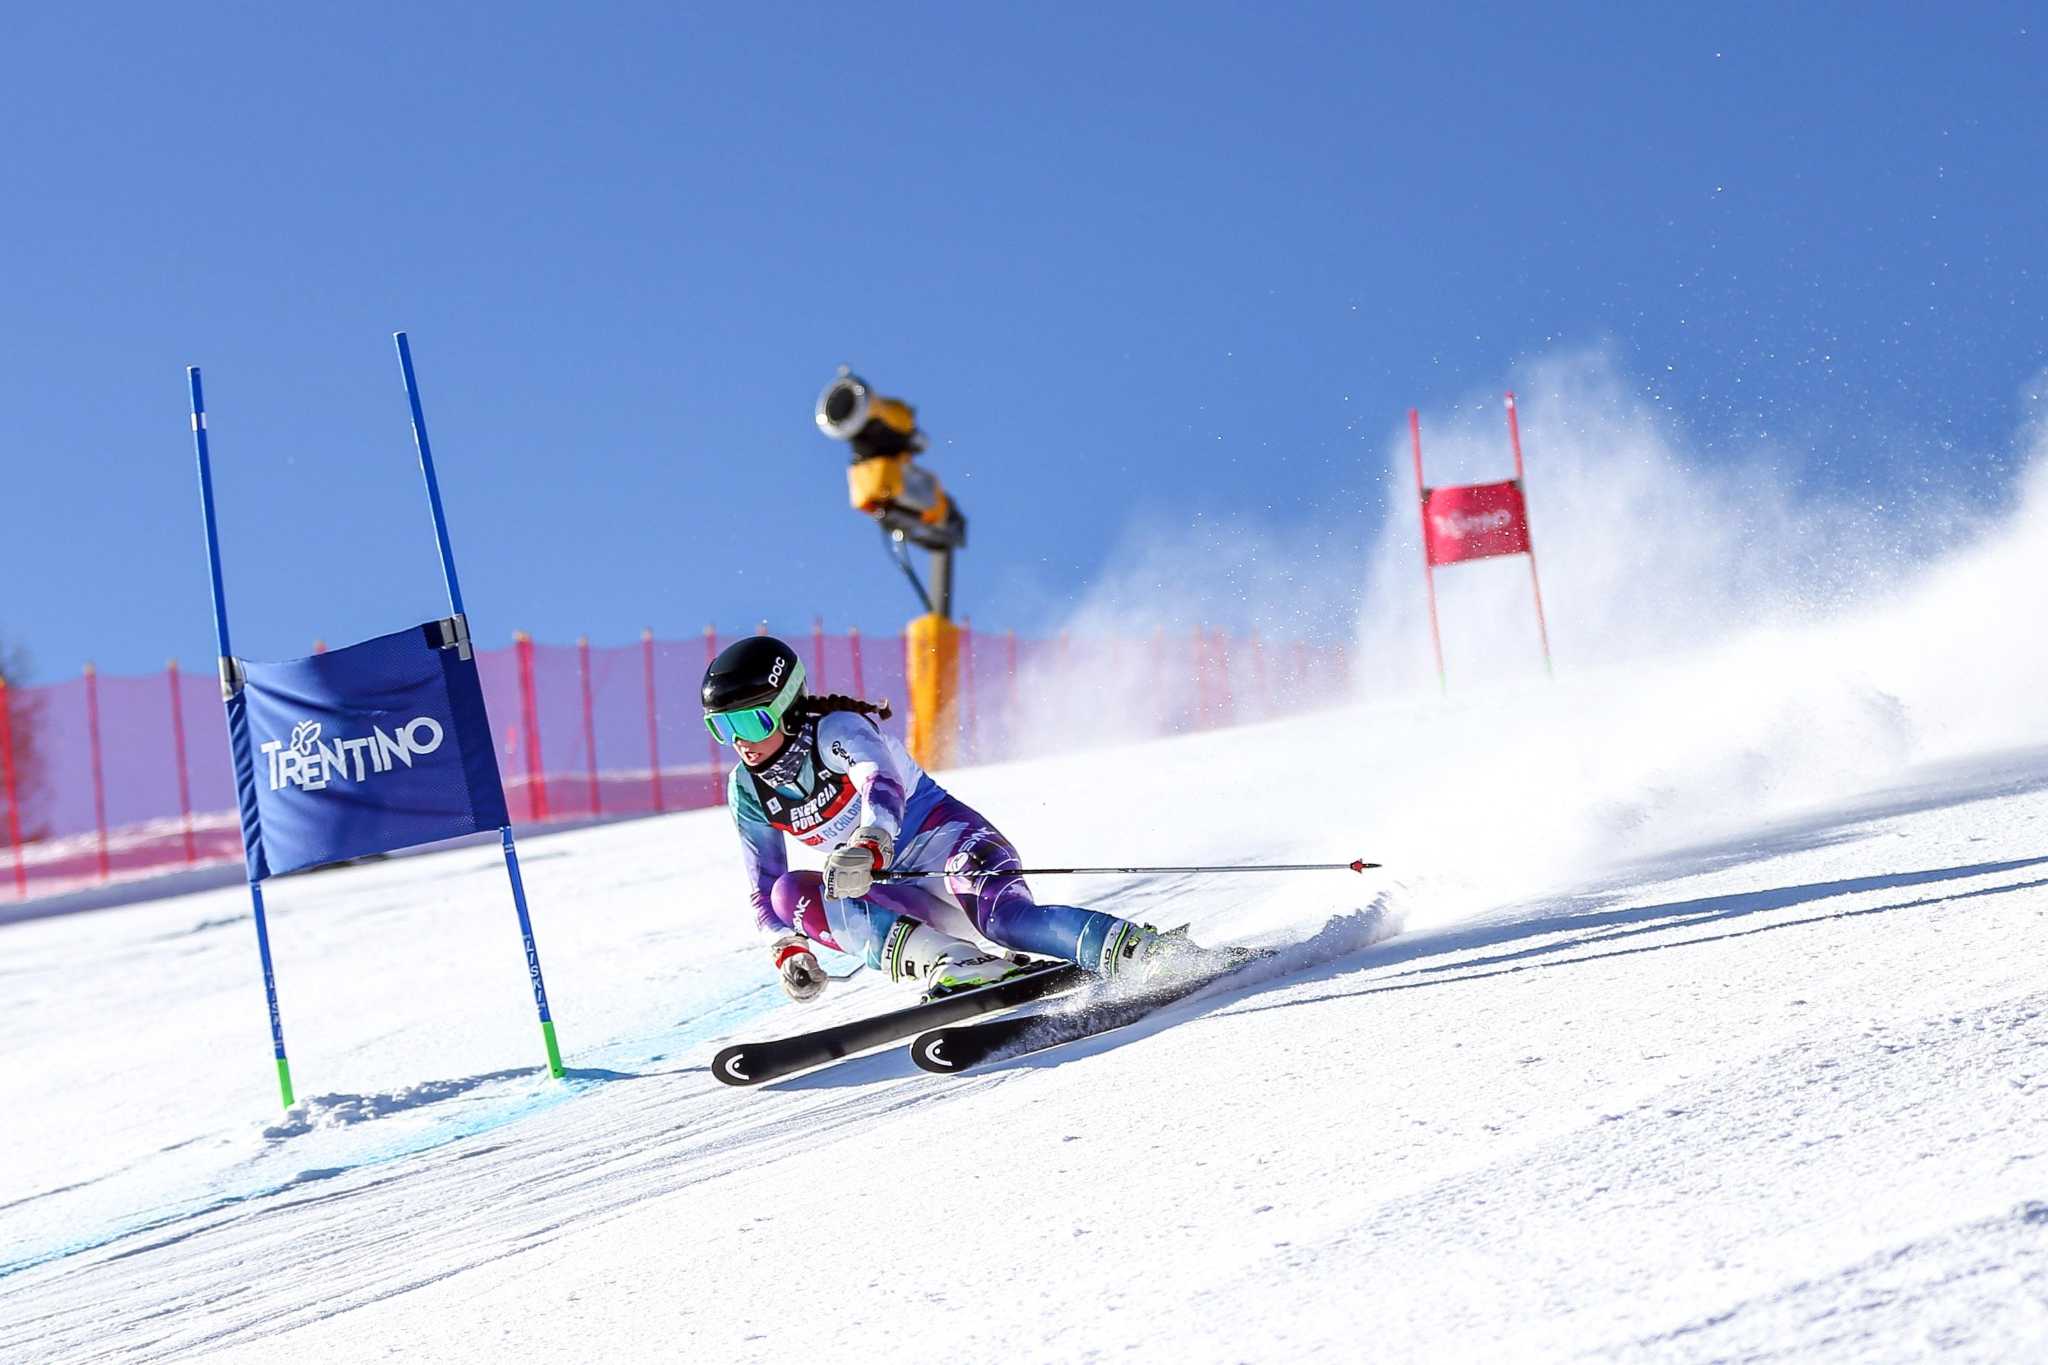 Greenwich resident Holm captures 2nd in giant slalom at FIS Children Cup - Greenwich Time